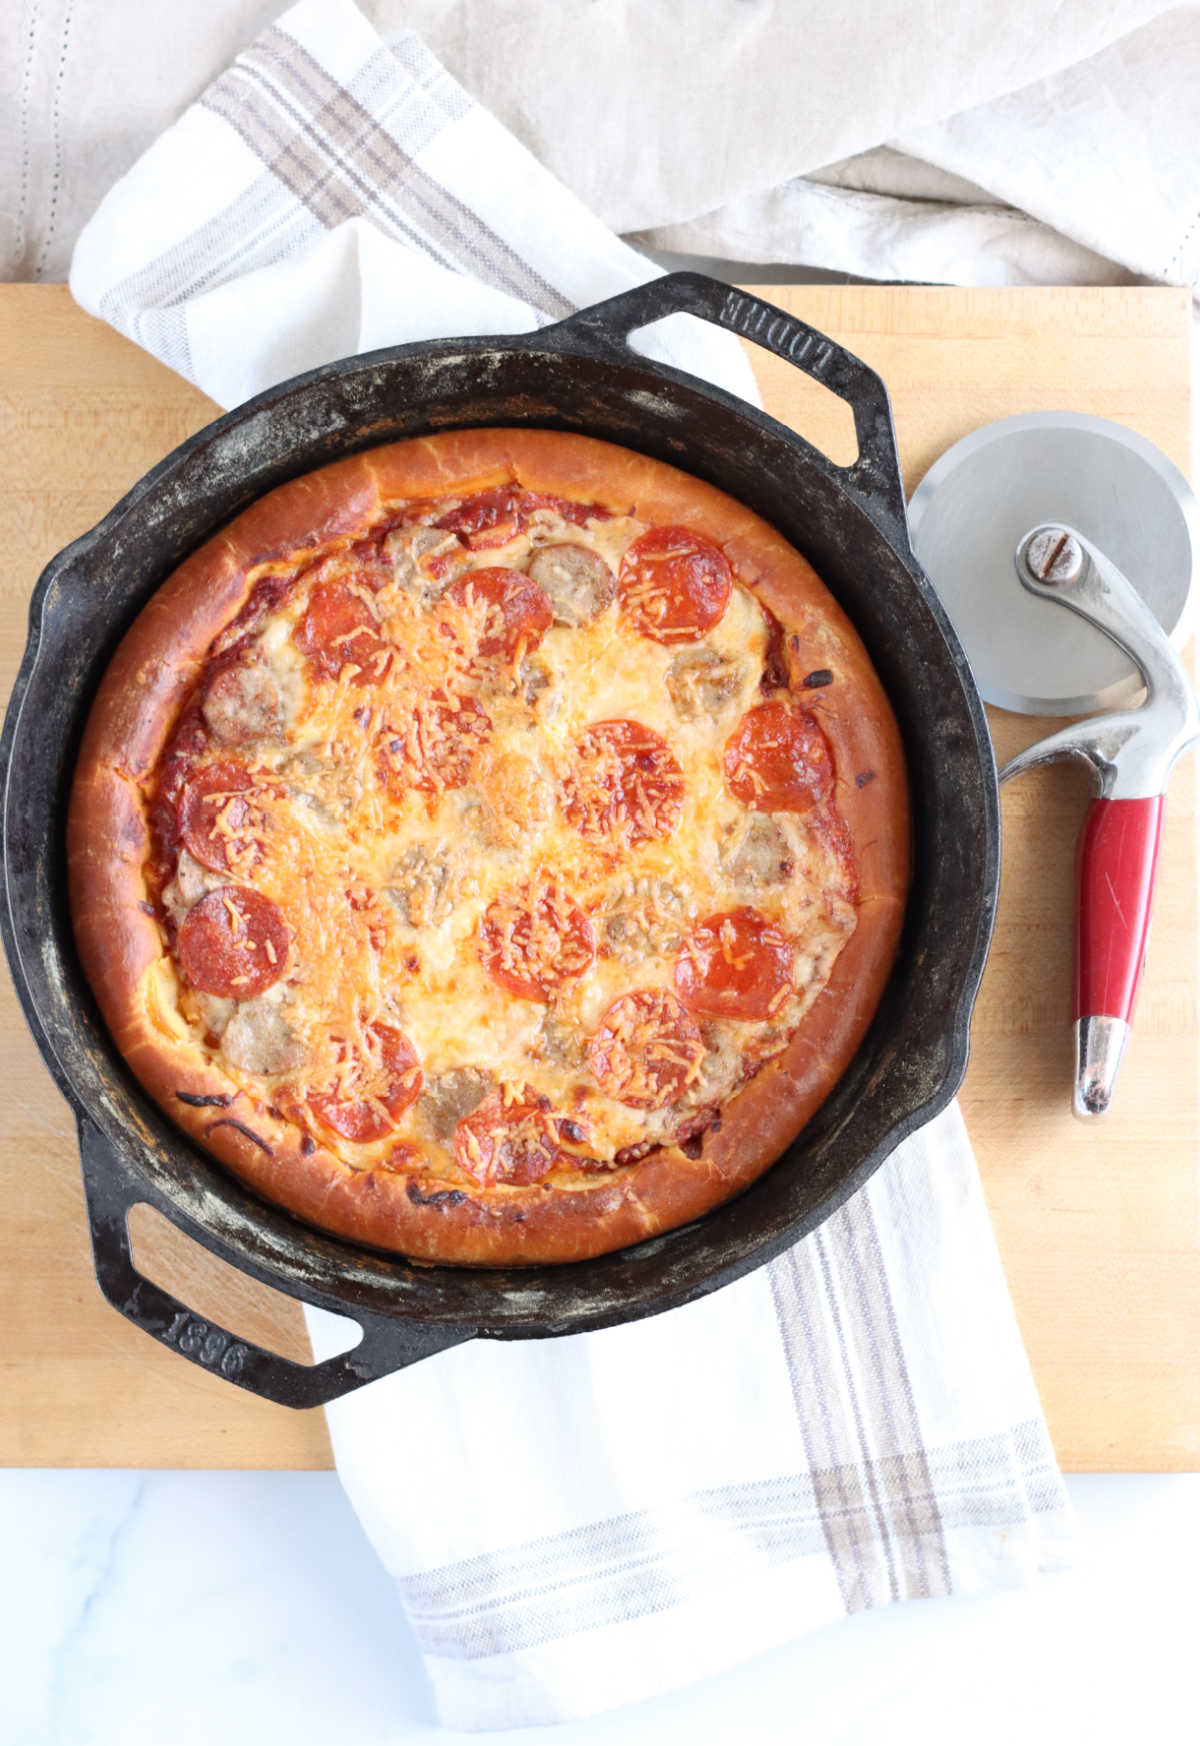 Skillet pizza in a dual handle cast iron skillet with pepperoni and golden brown cheese.